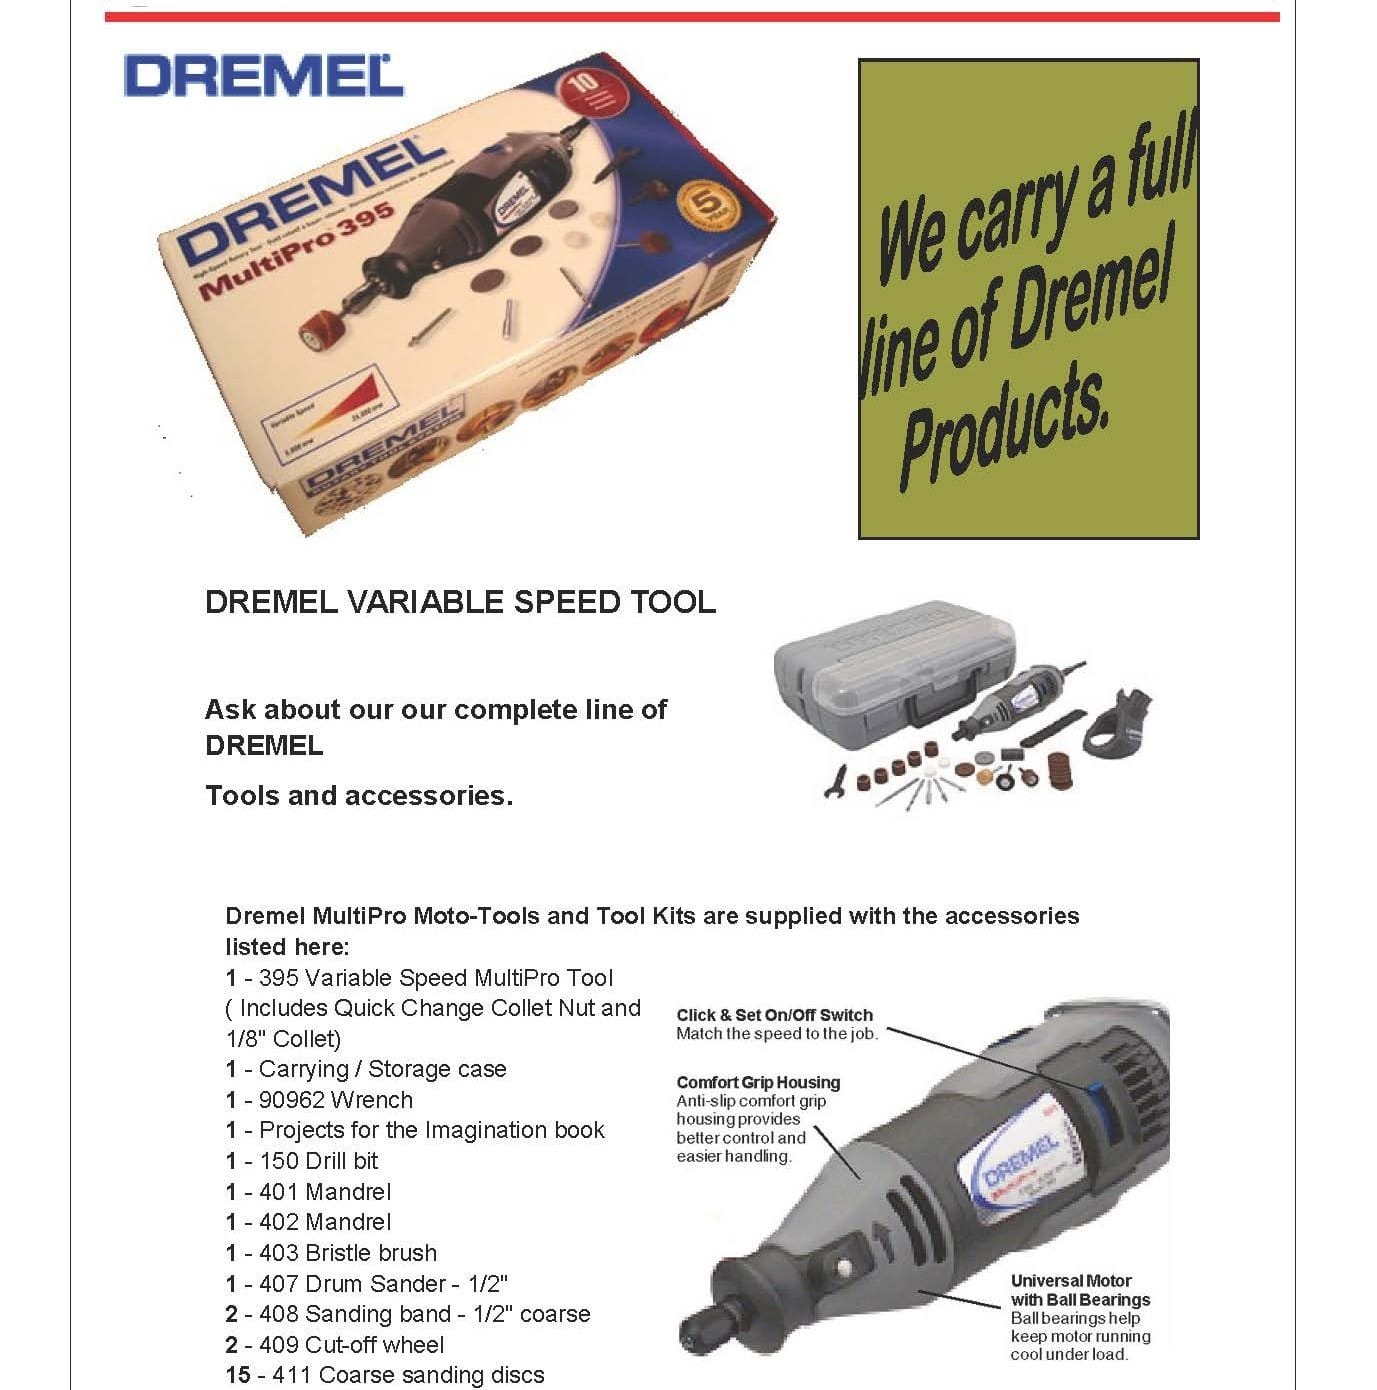 DREMEL VARIABLE SPEED TOOL DREMEL REPLACEMENT PARTS AND WHEELS